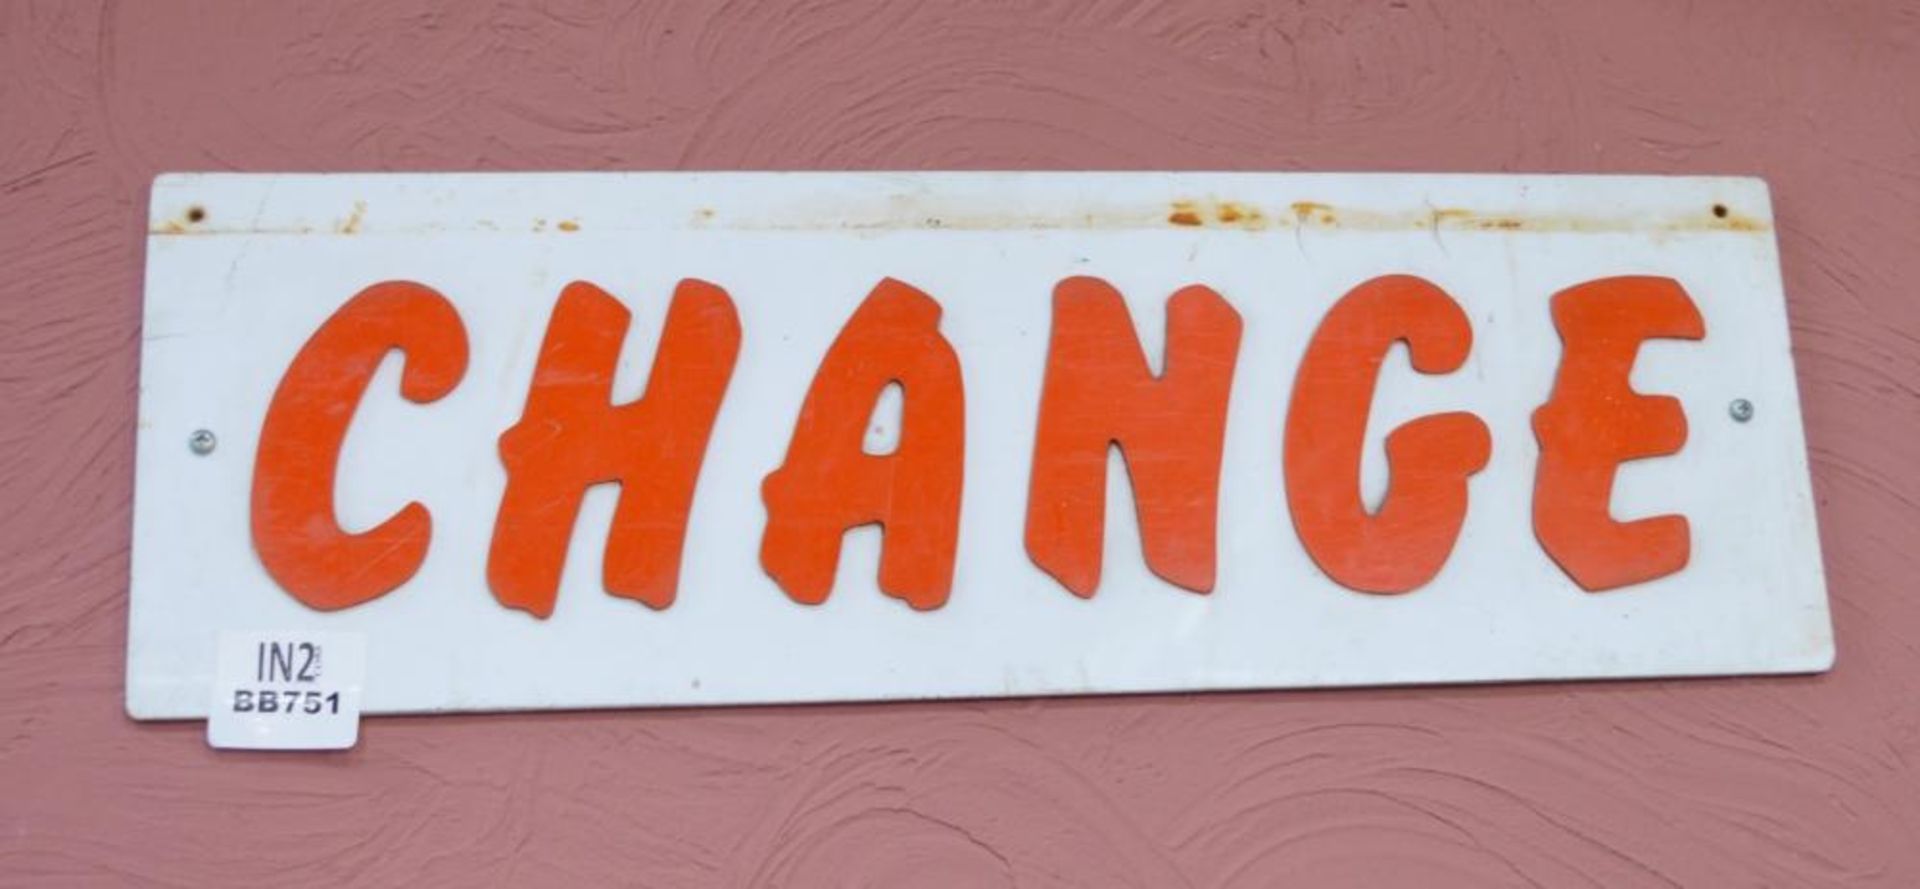 1 x Vintage Acrylic Arcade "Change" Notice Sign - 8 x 24 Inches - Ref BB751 - CL351 - Location: Chor